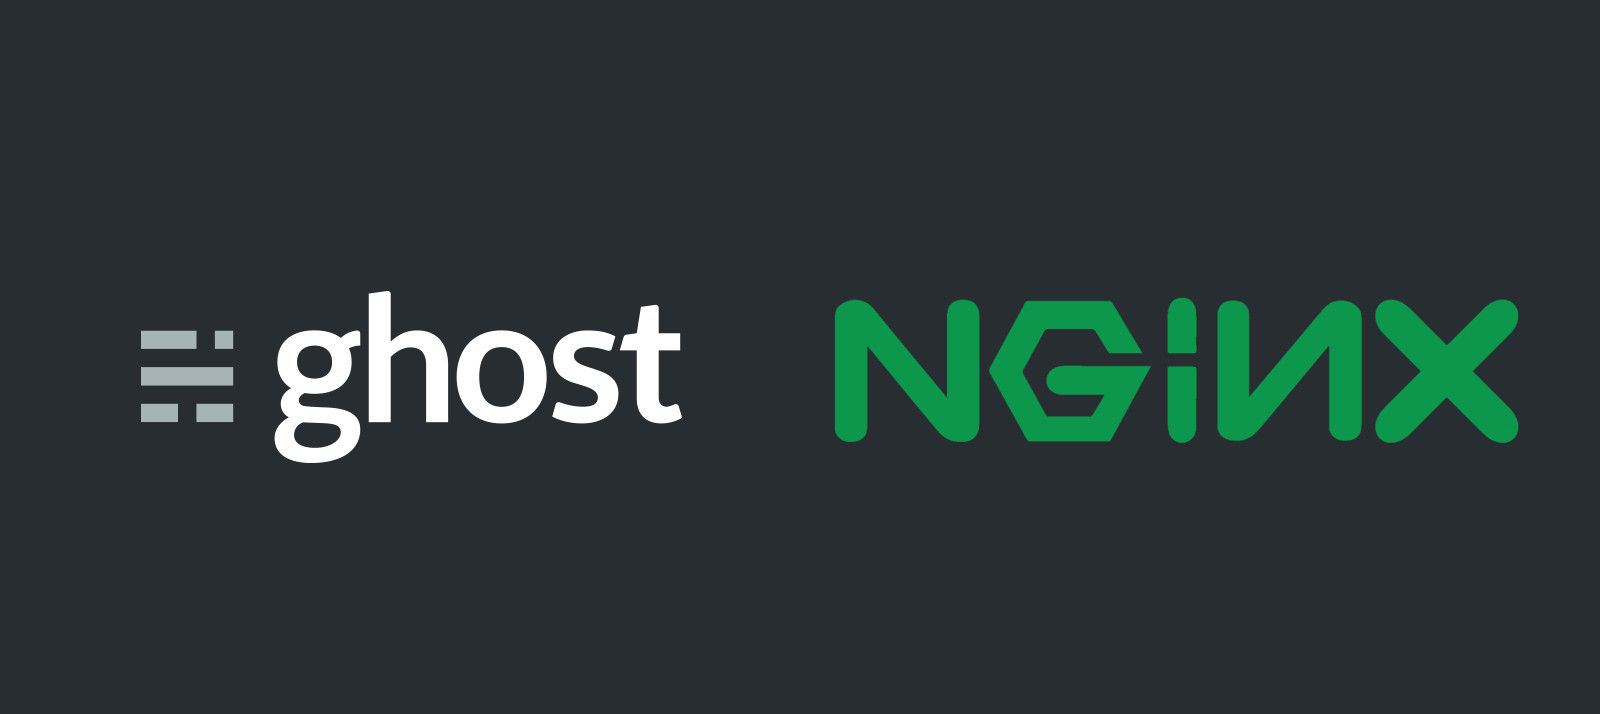 Make you Ghost website faster and handle more requests with Nginx cache!